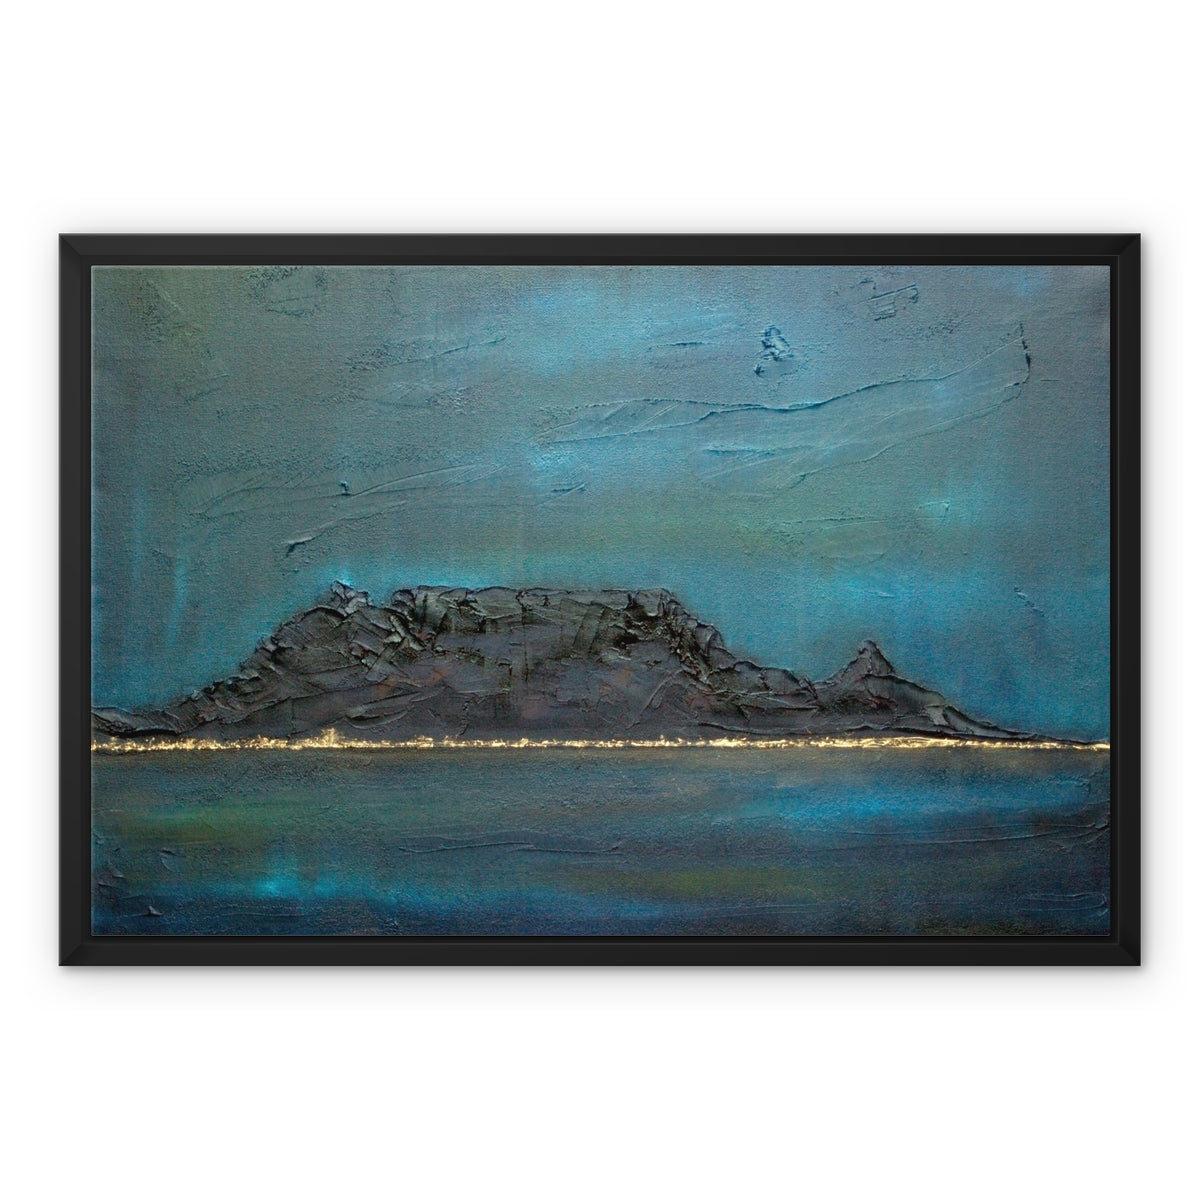 Table Mountain Dusk Painting | Framed Canvas From Scotland-Floating Framed Canvas Prints-World Art Gallery-24"x18"-Paintings, Prints, Homeware, Art Gifts From Scotland By Scottish Artist Kevin Hunter